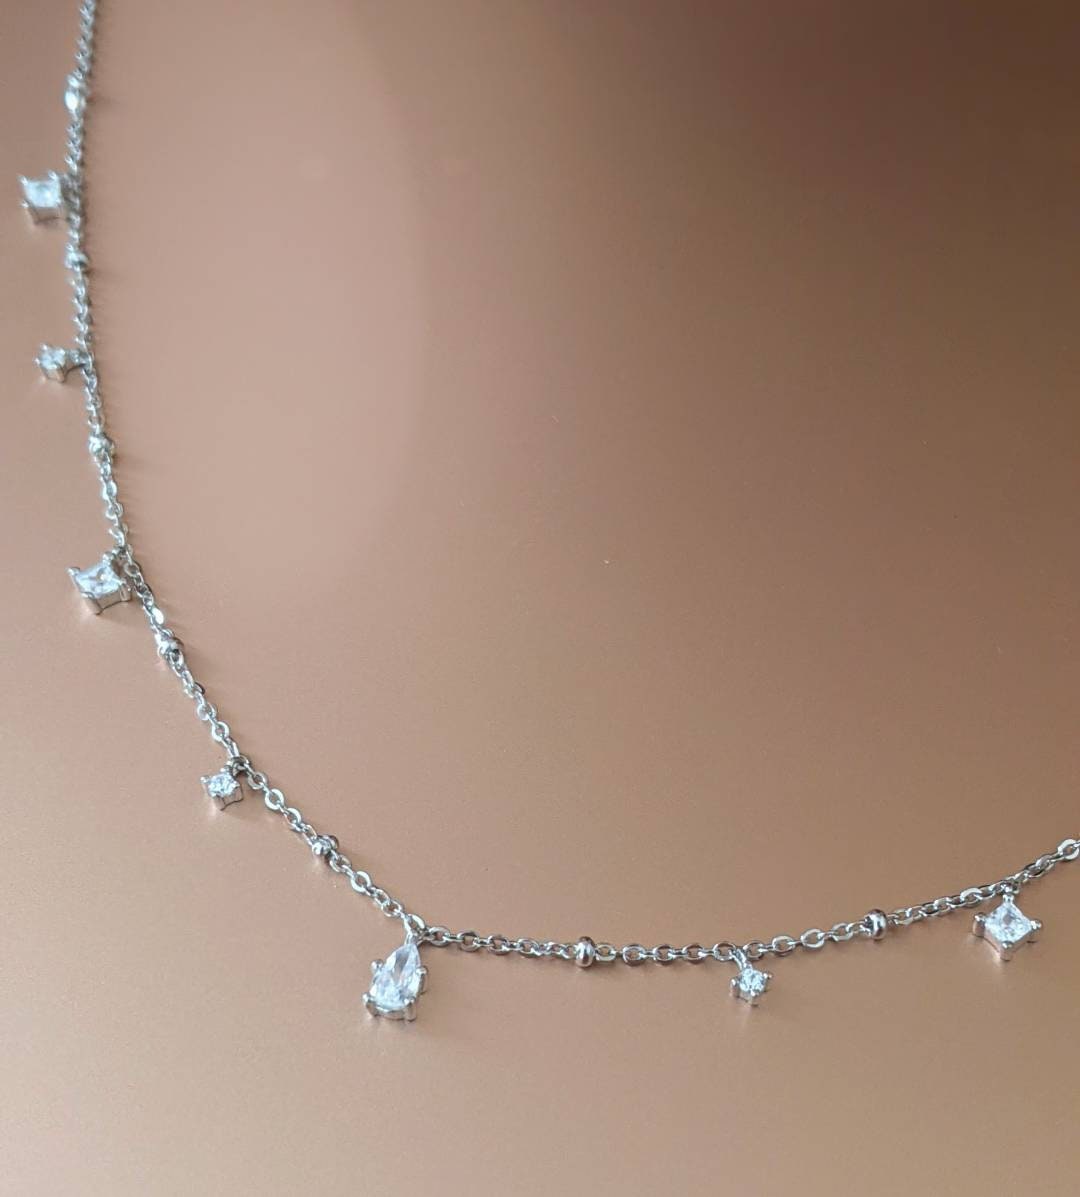 White clear cubic zircon gems jewels in silver chain